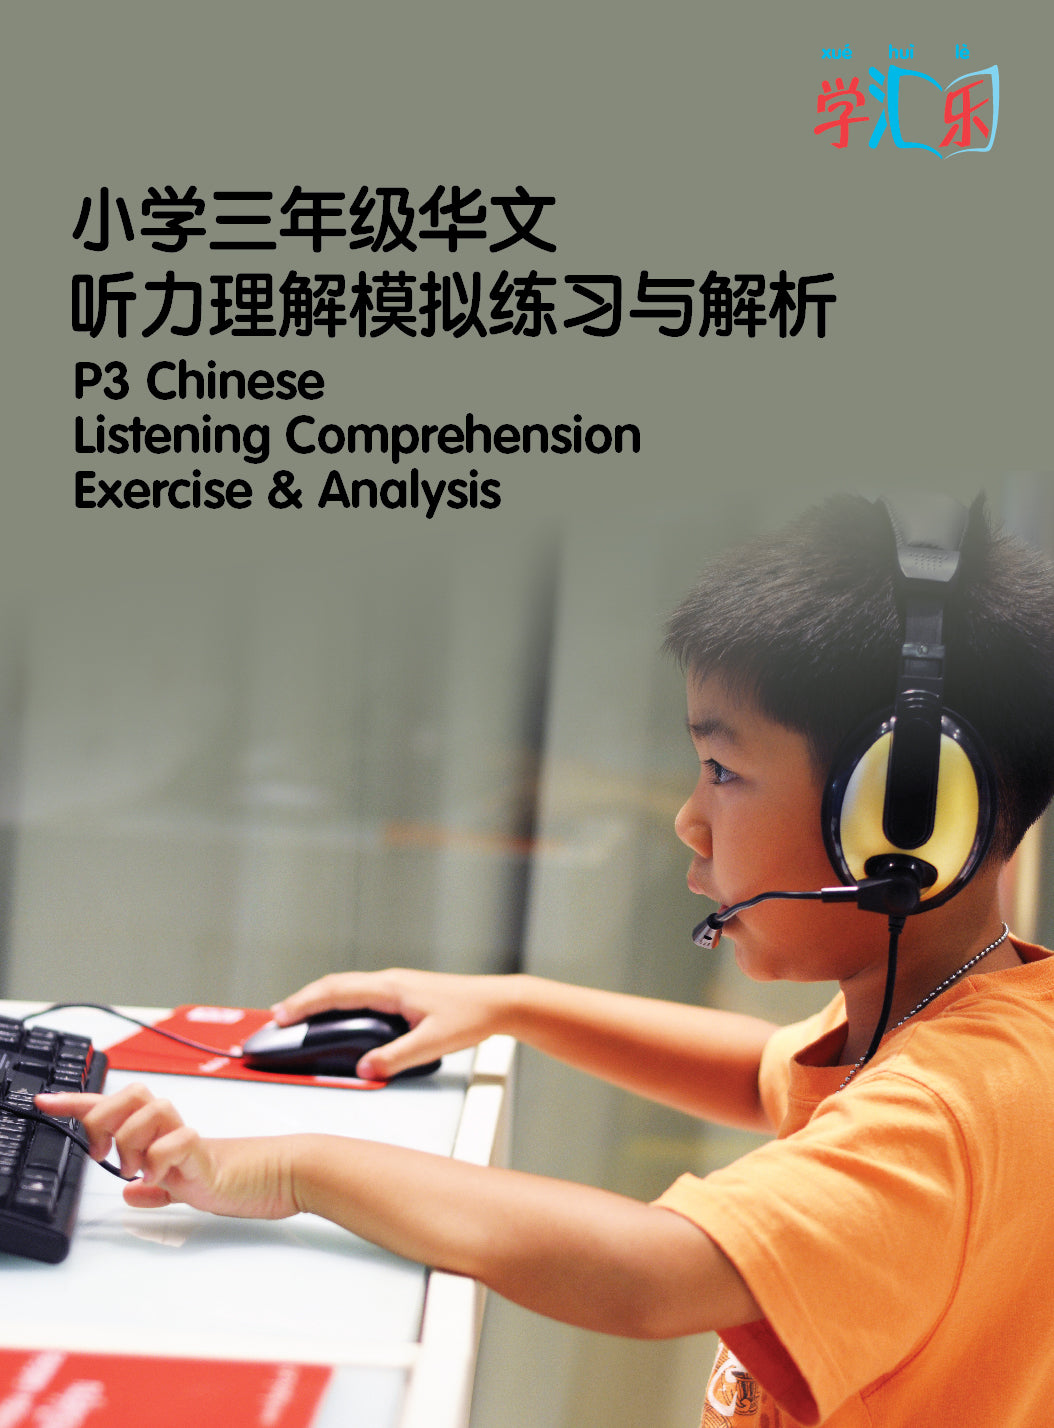 P3 Chinese Listening Comprehension Exercise and Analysis